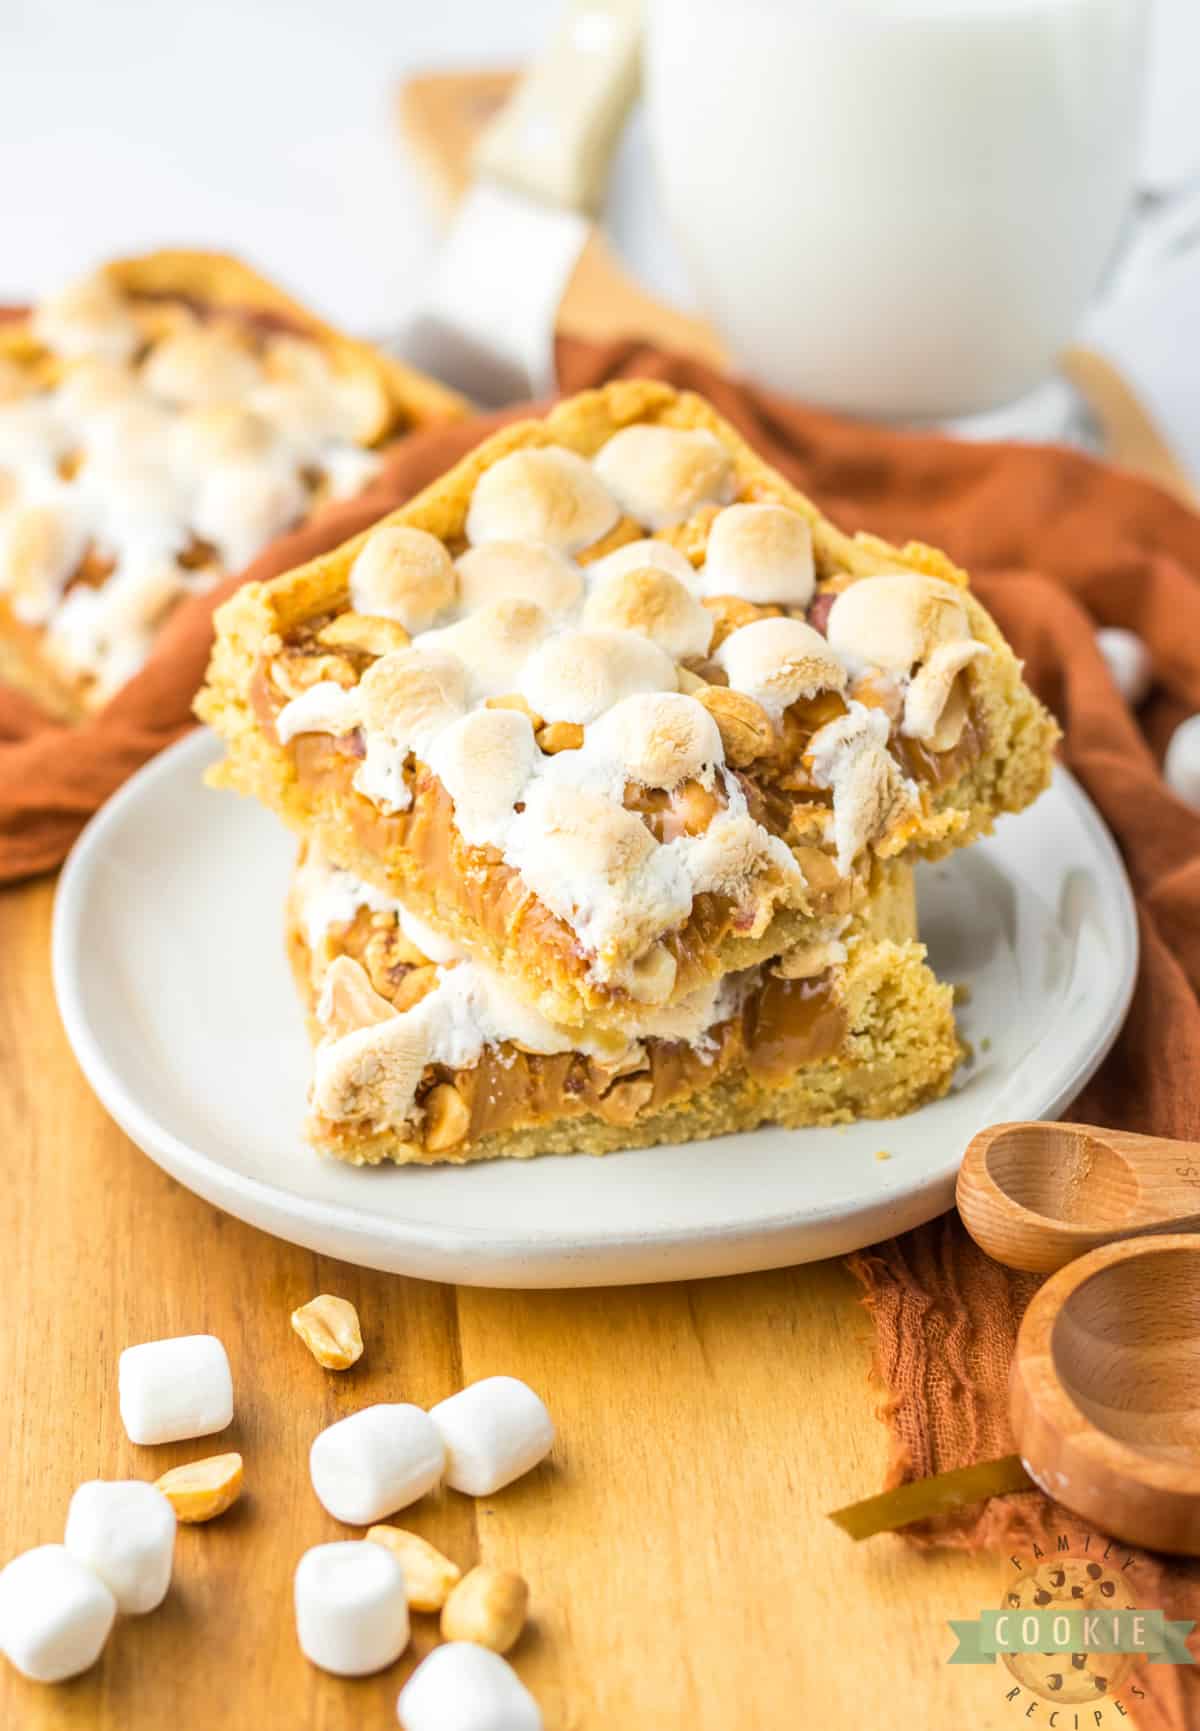 Easy Peanut Caramel Cookie Bars are made with only 5 ingredients! Chewy cookie bar recipe made with a sugar cookie crust that is topped with melted caramel, peanuts and marshmallows. 